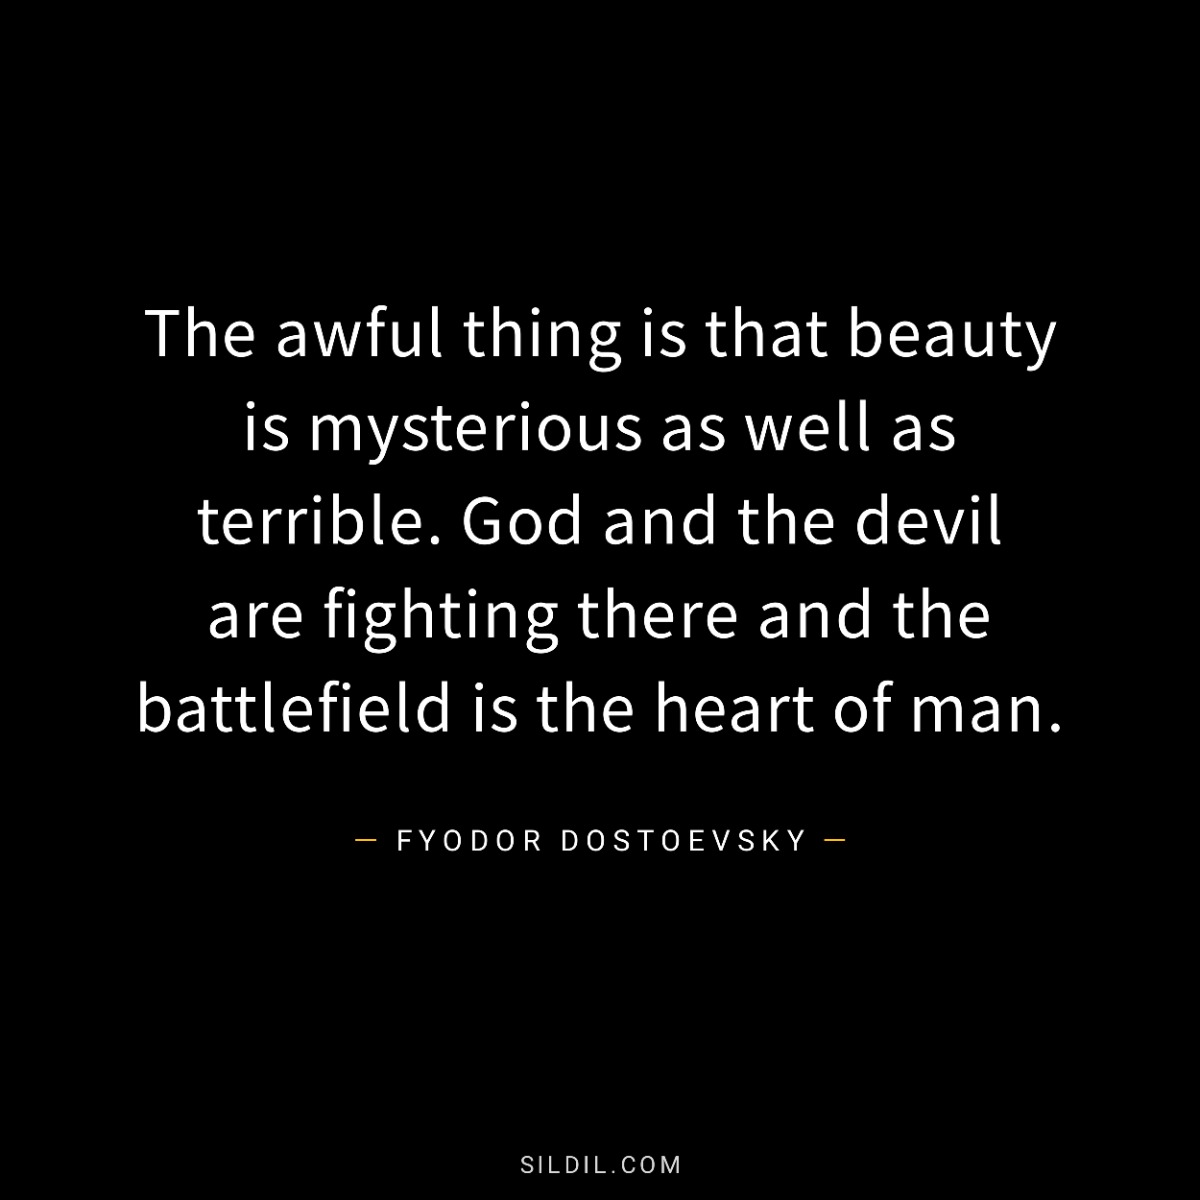 The awful thing is that beauty is mysterious as well as terrible. God and the devil are fighting there and the battlefield is the heart of man.